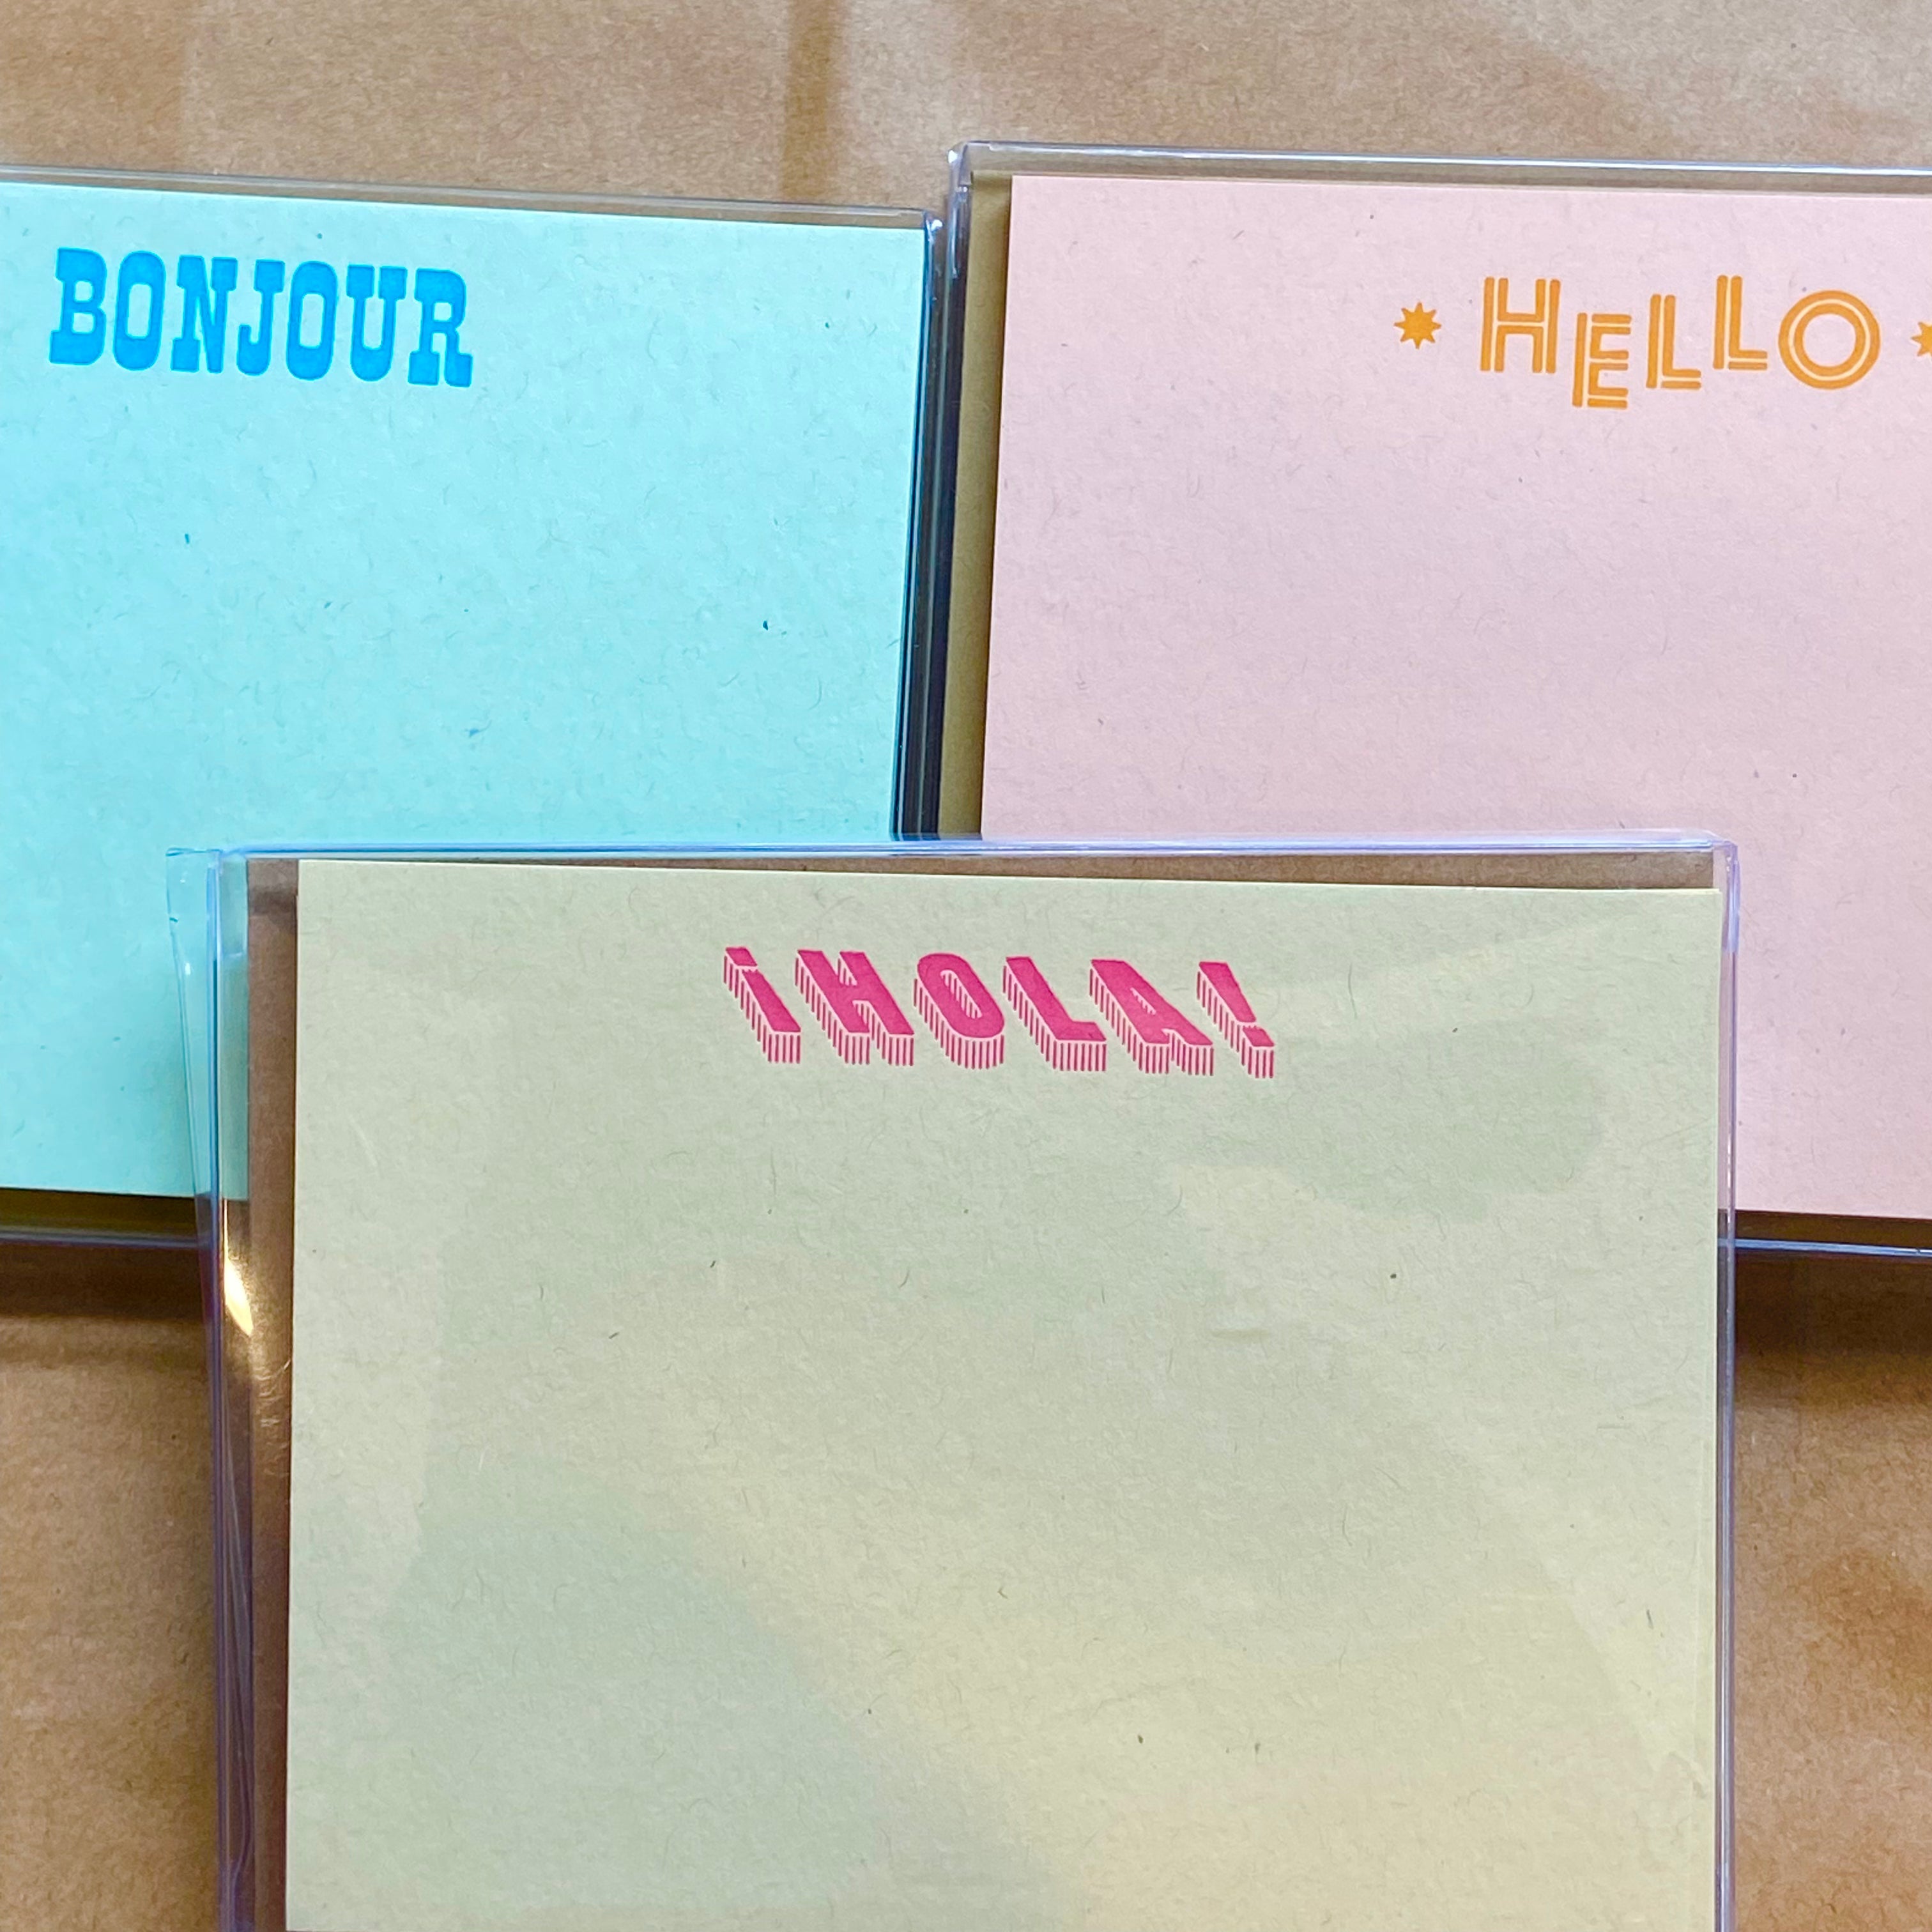 Hola- Boxed Set of Greeting Cards